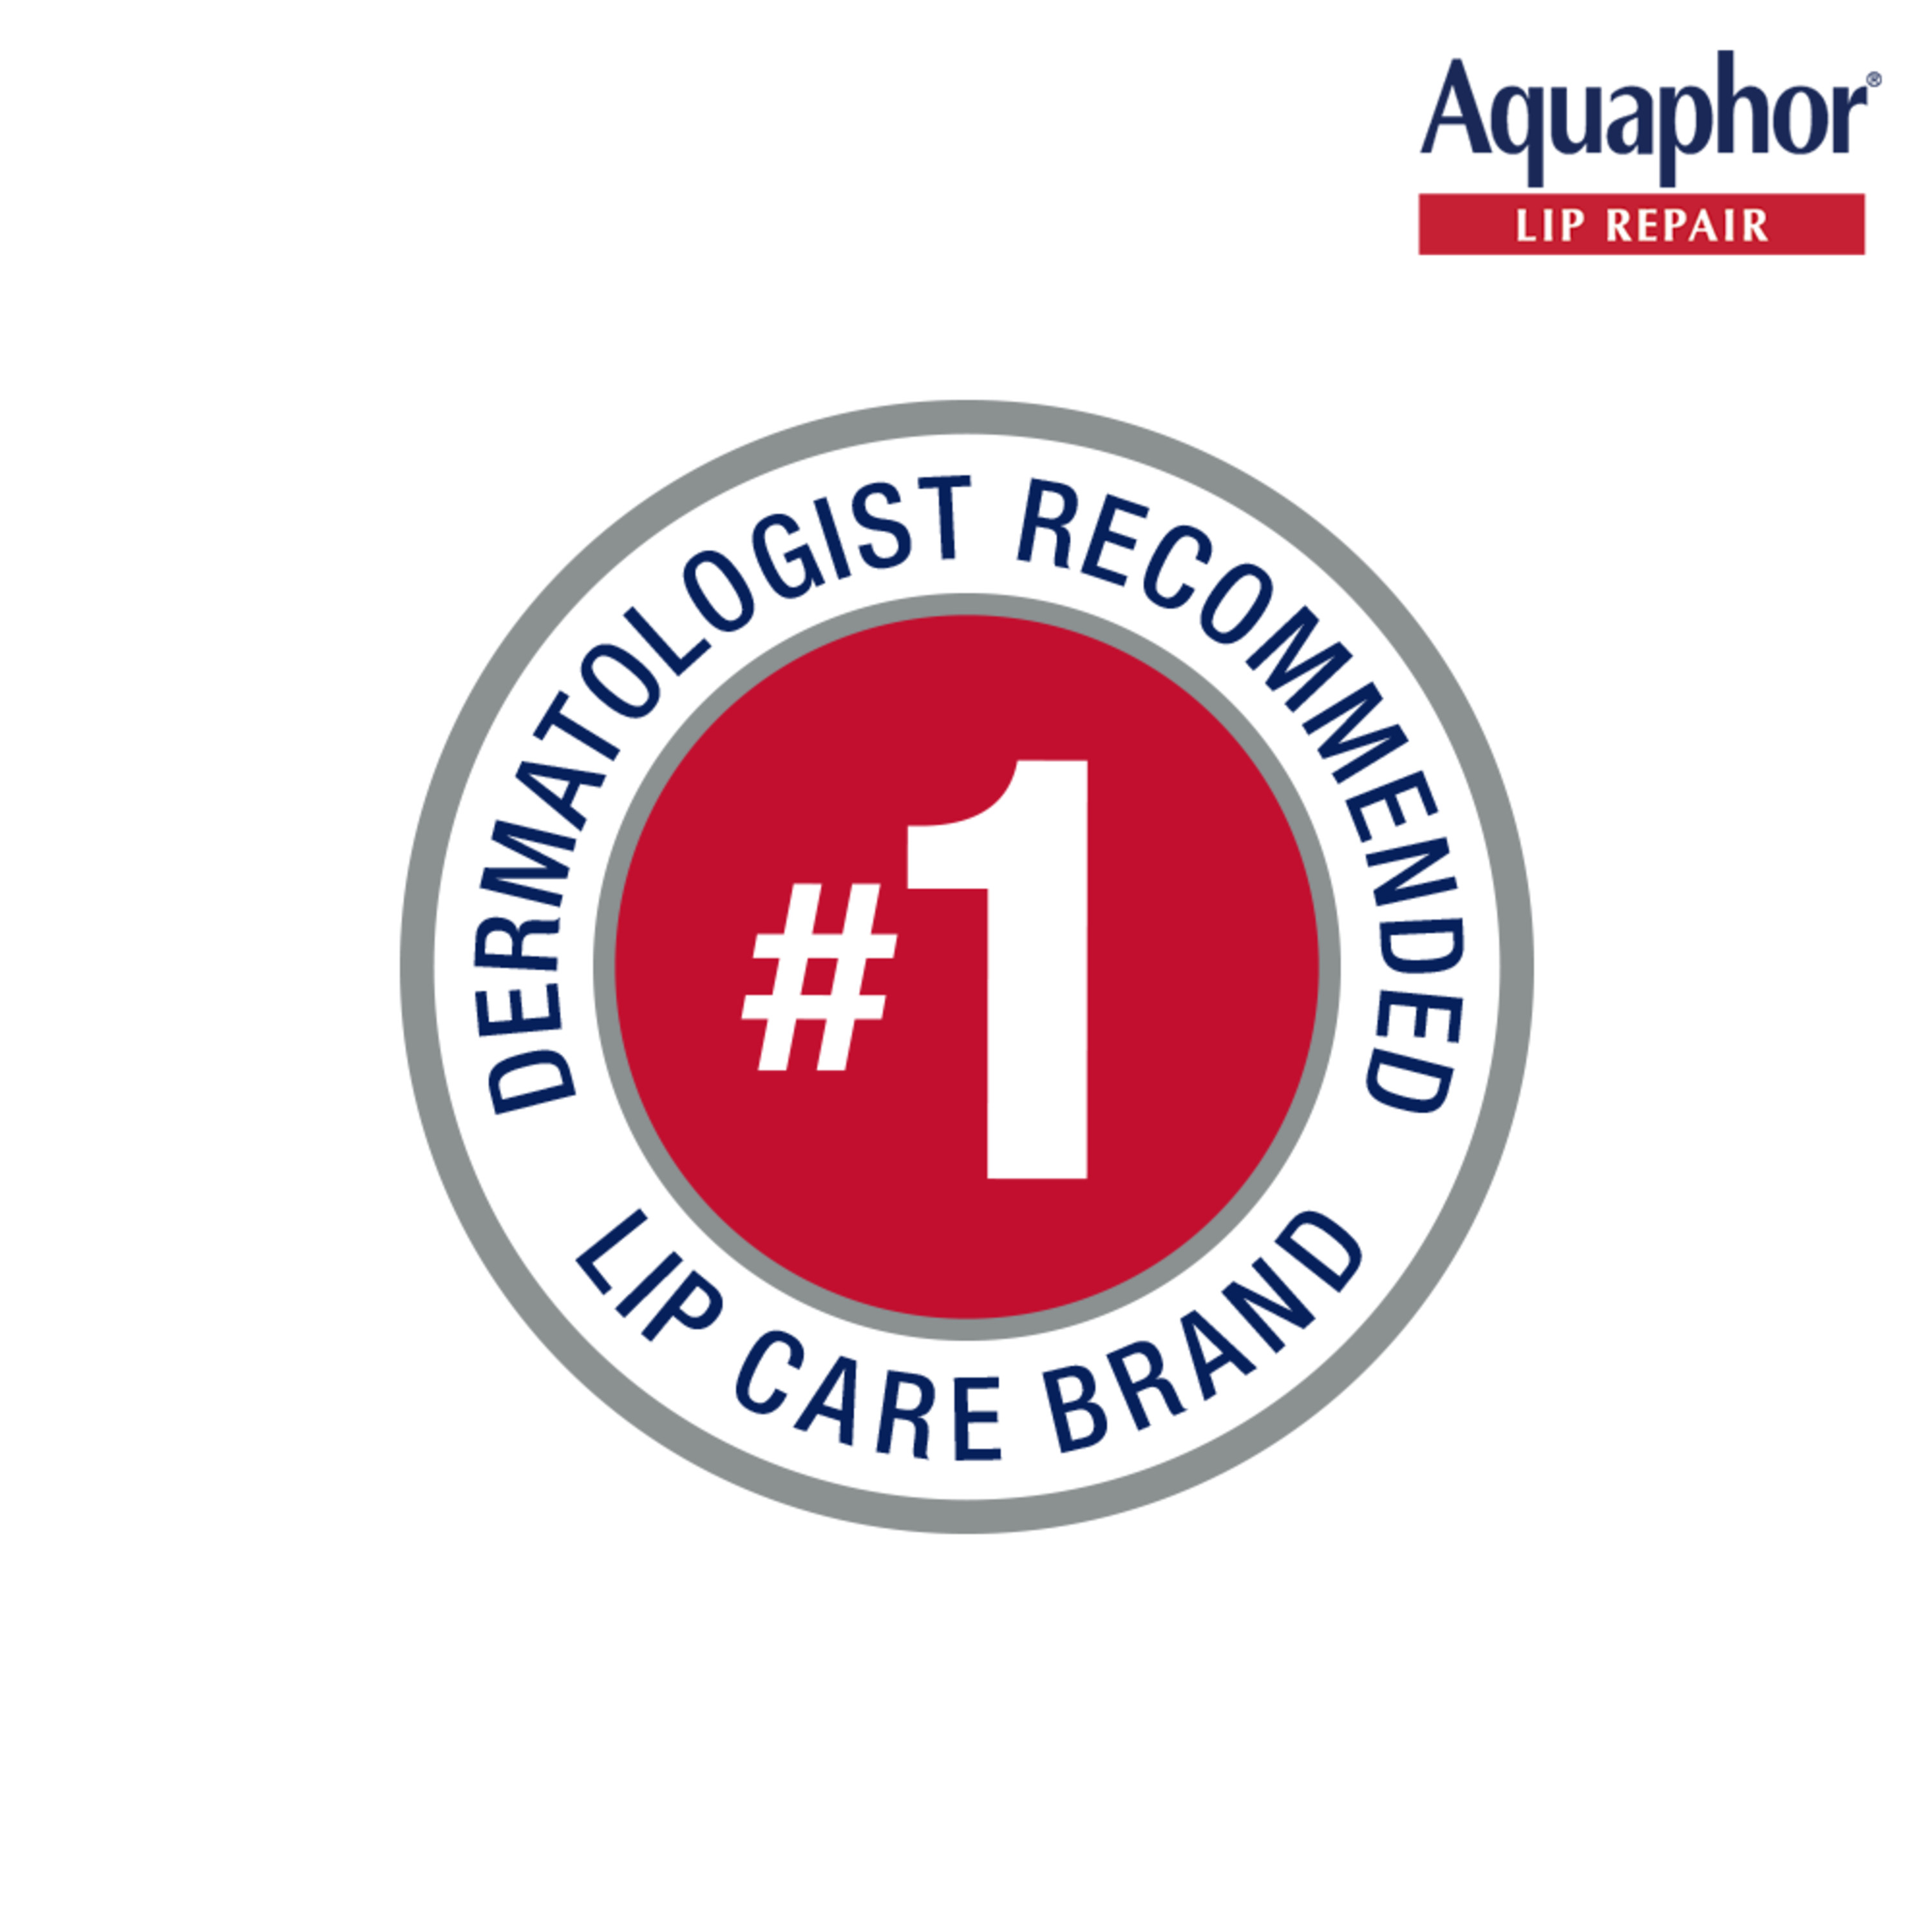 Aquaphor Lip Repair Ointment, Long-lasting Moisture to Soothe Dry Chapped Lips, .35 fl. oz. Tube - image 4 of 9